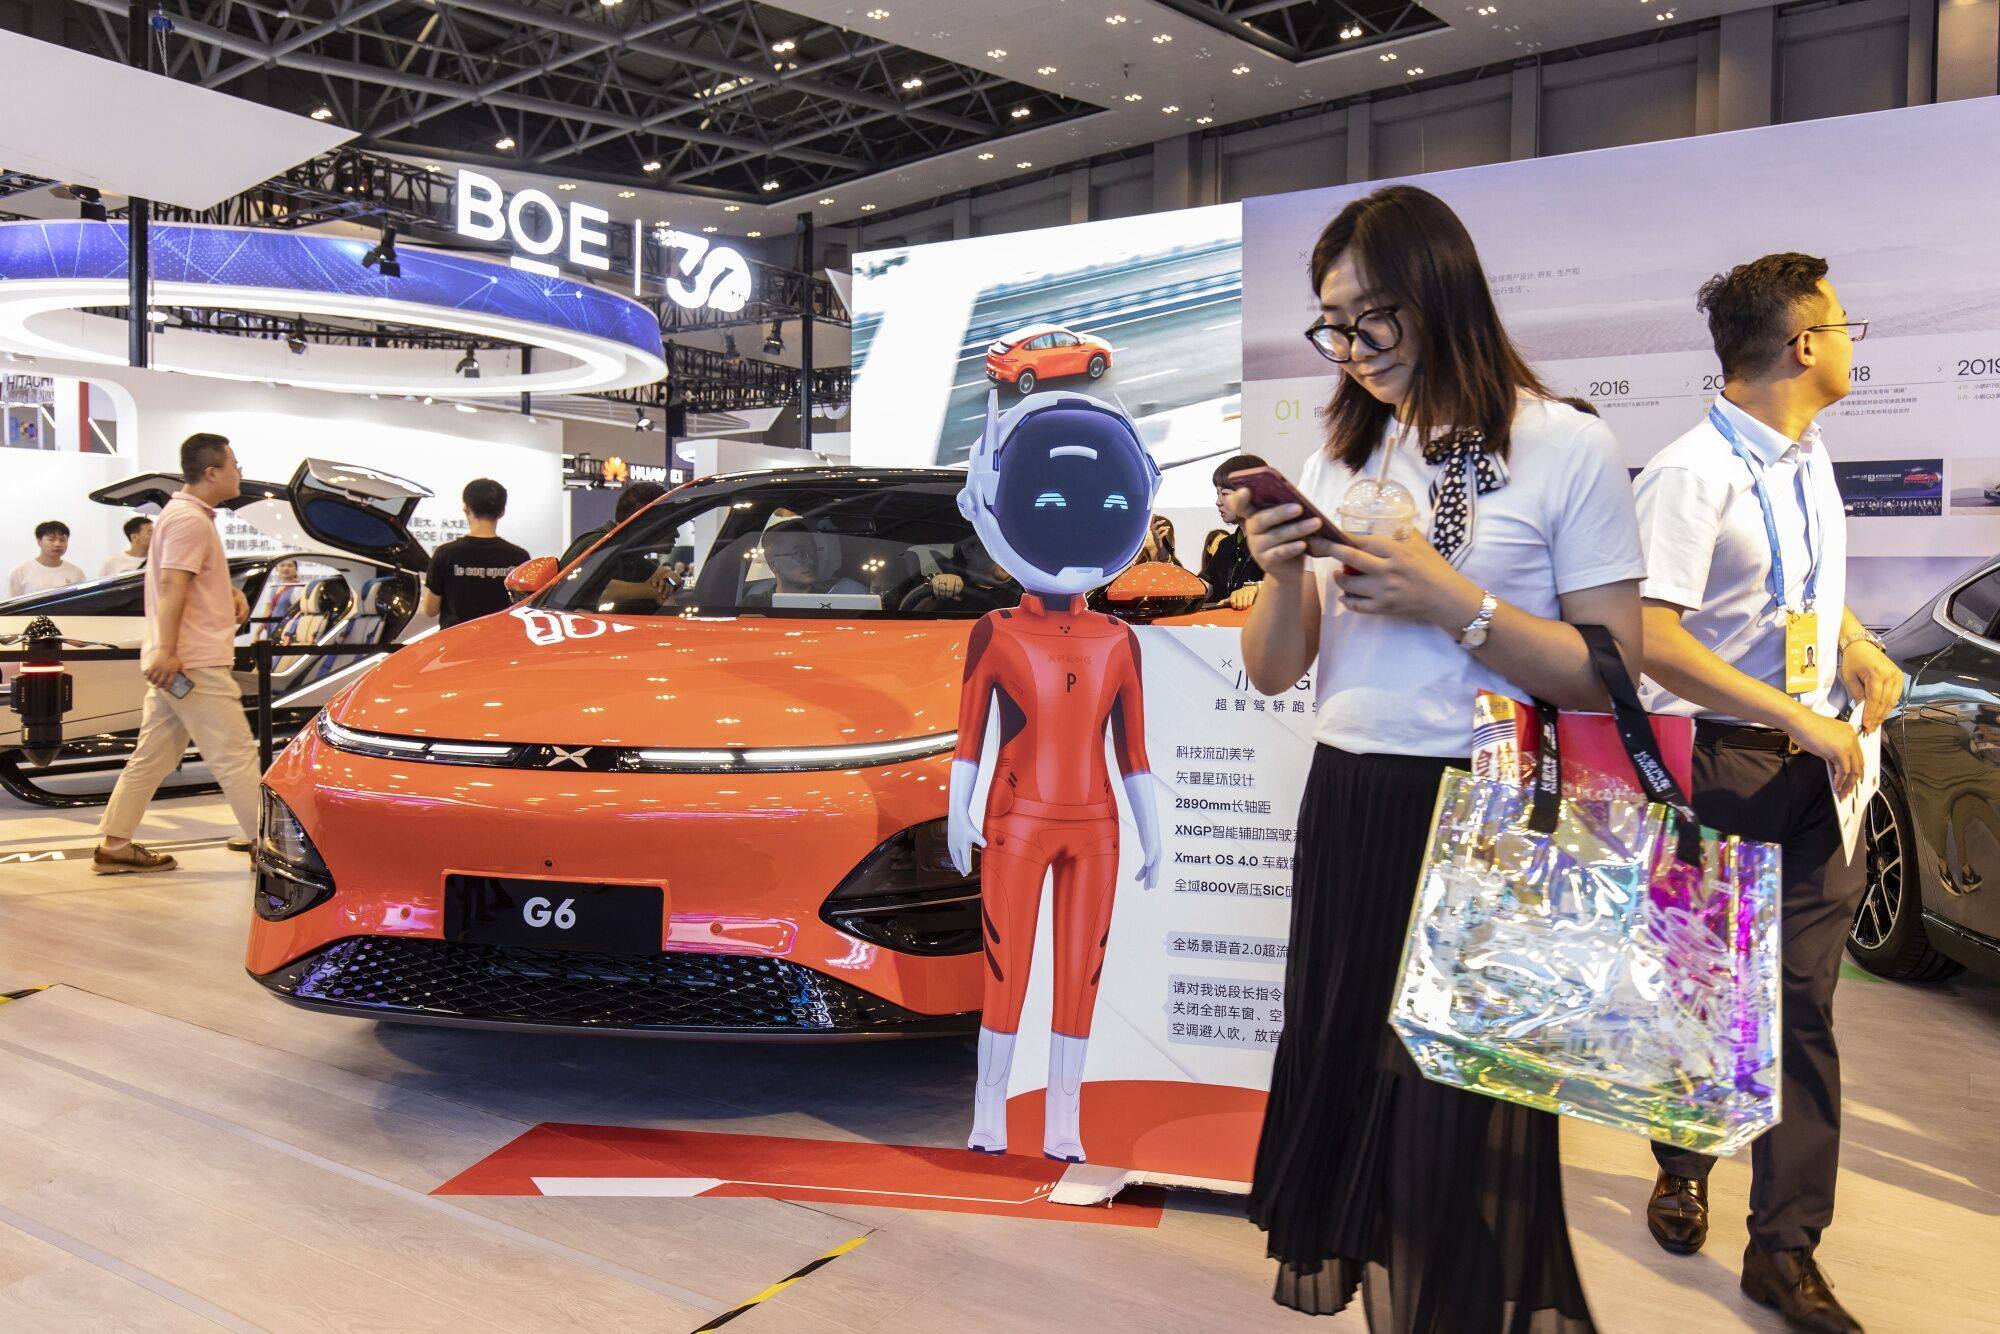 An Xpeng G6 electric vehicle is displayed at the Smart China Expo in Chongqing, China, on September 4, 2023. Photo: Bloomberg